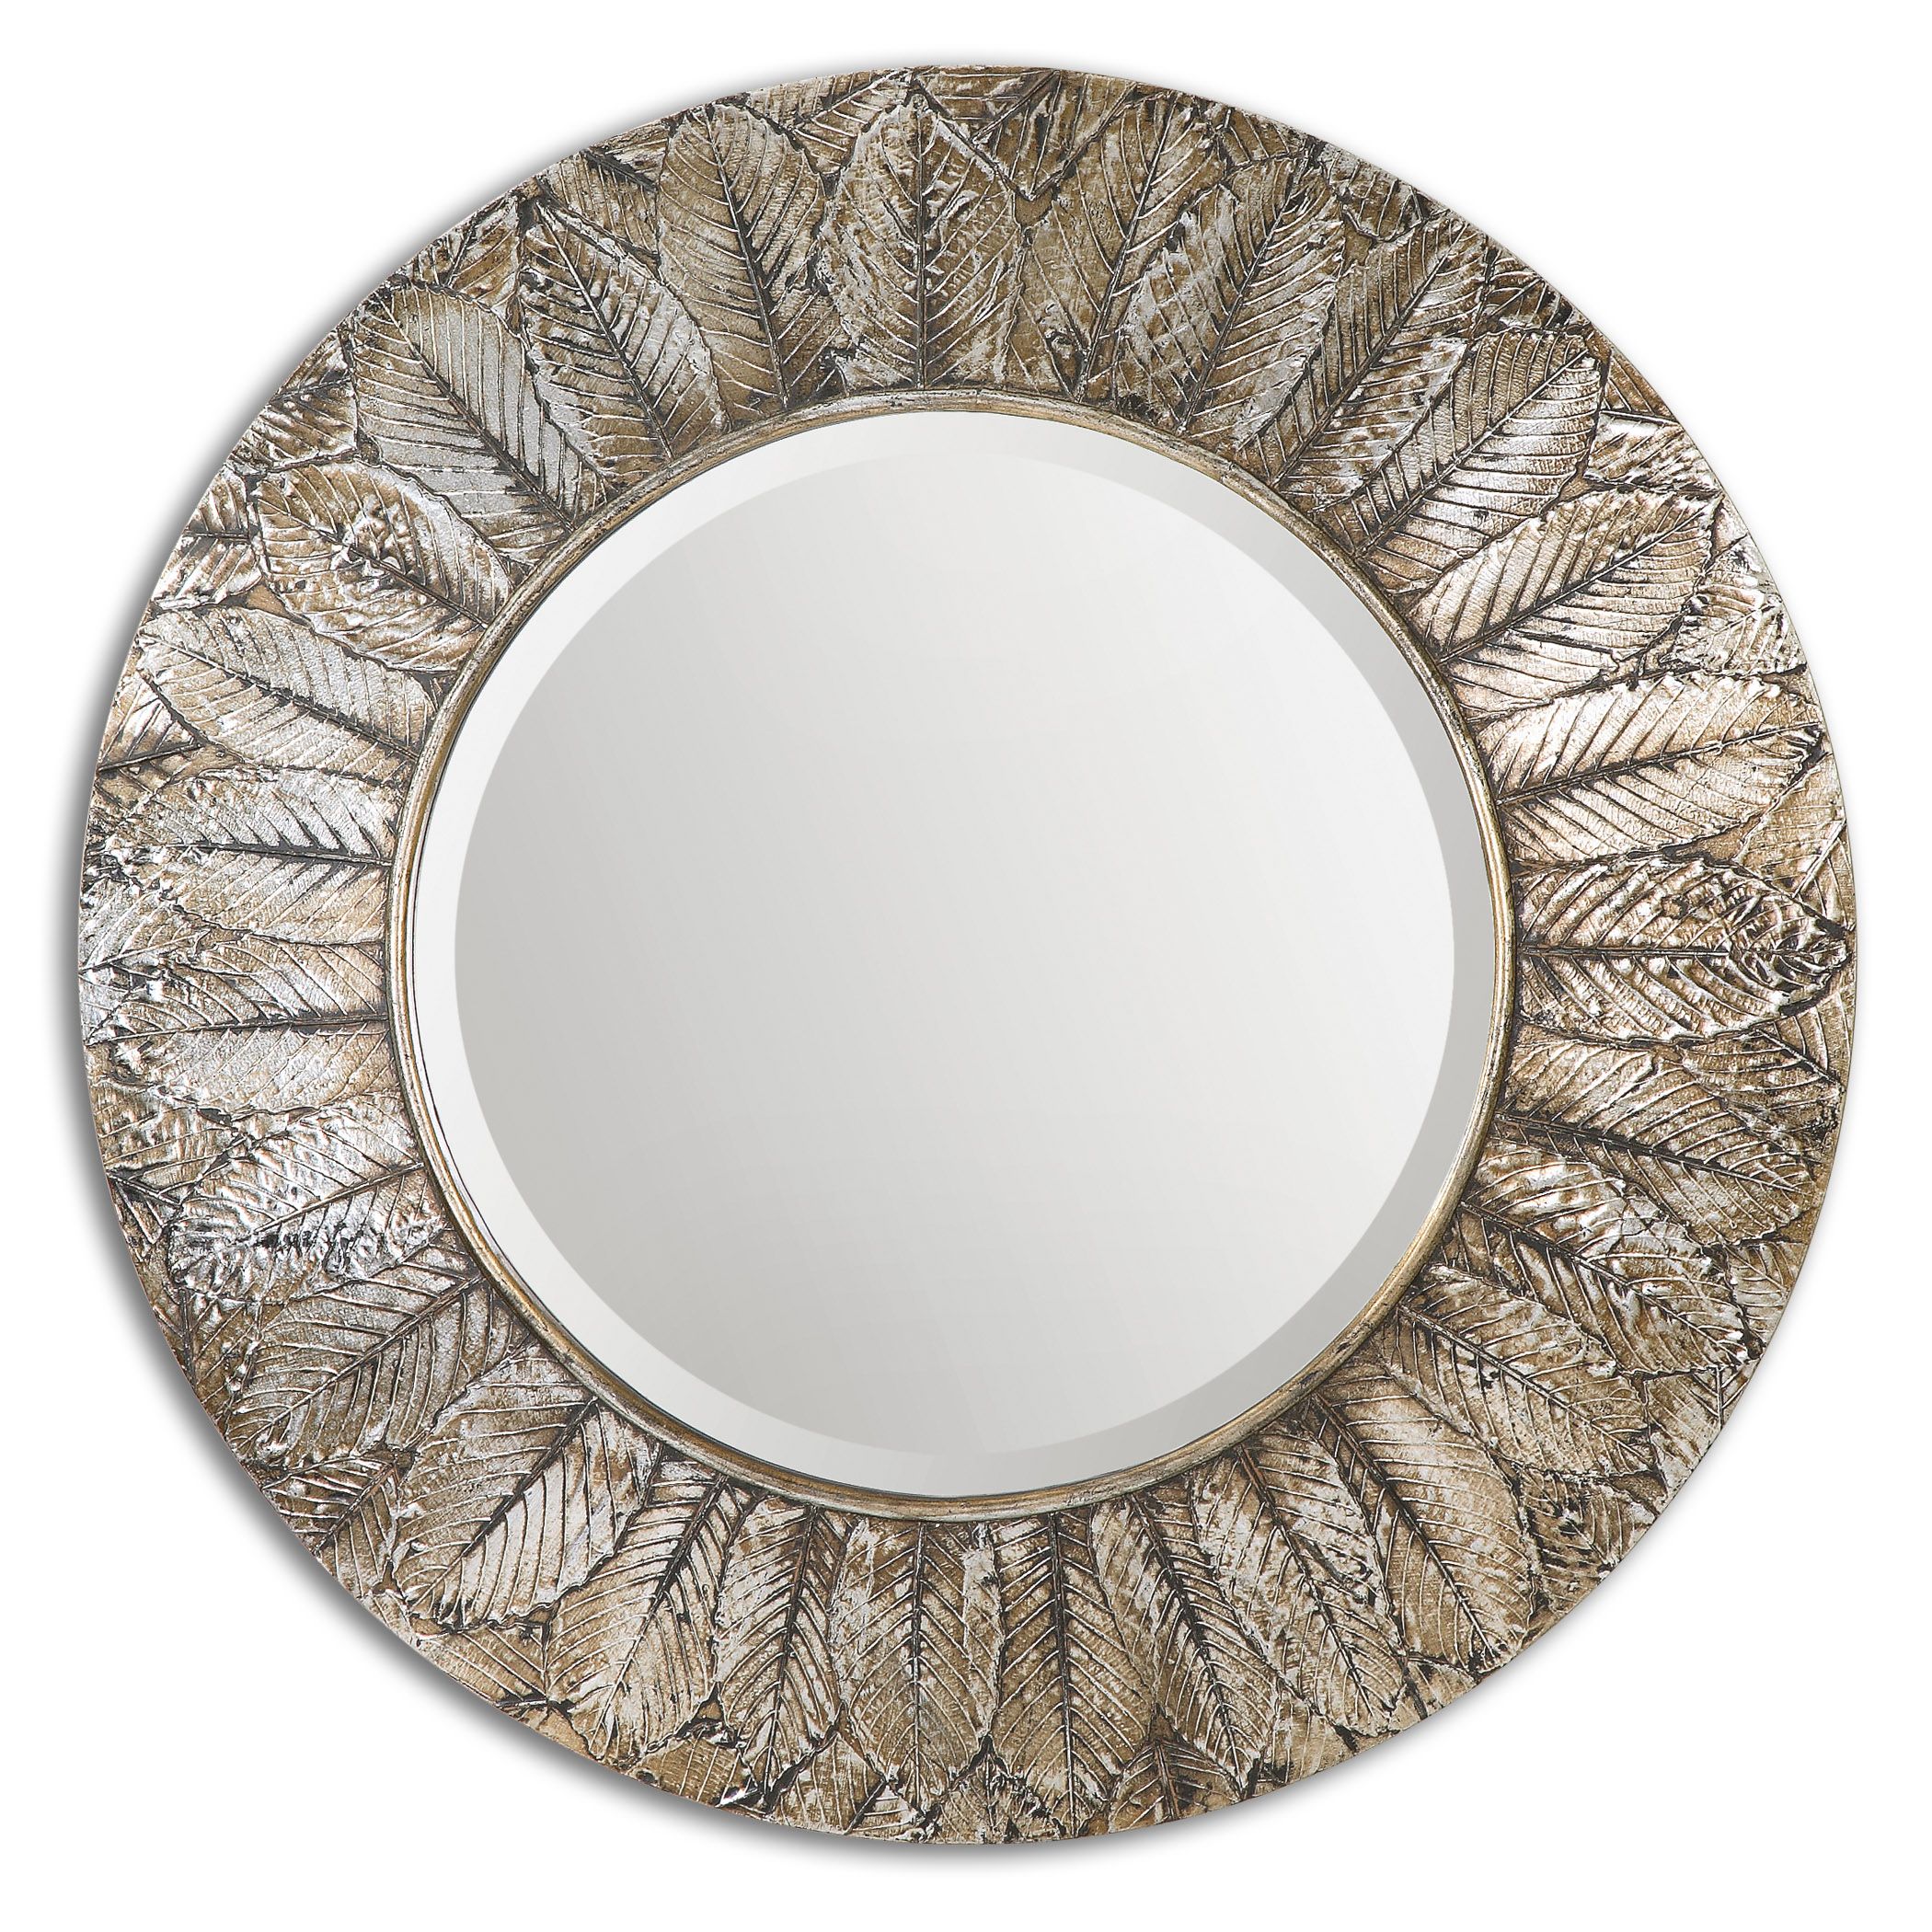 Uttermost Foliage Round Silver Leaf Mirror Within Antique Gold Leaf Round Oversized Wall Mirrors (View 4 of 15)